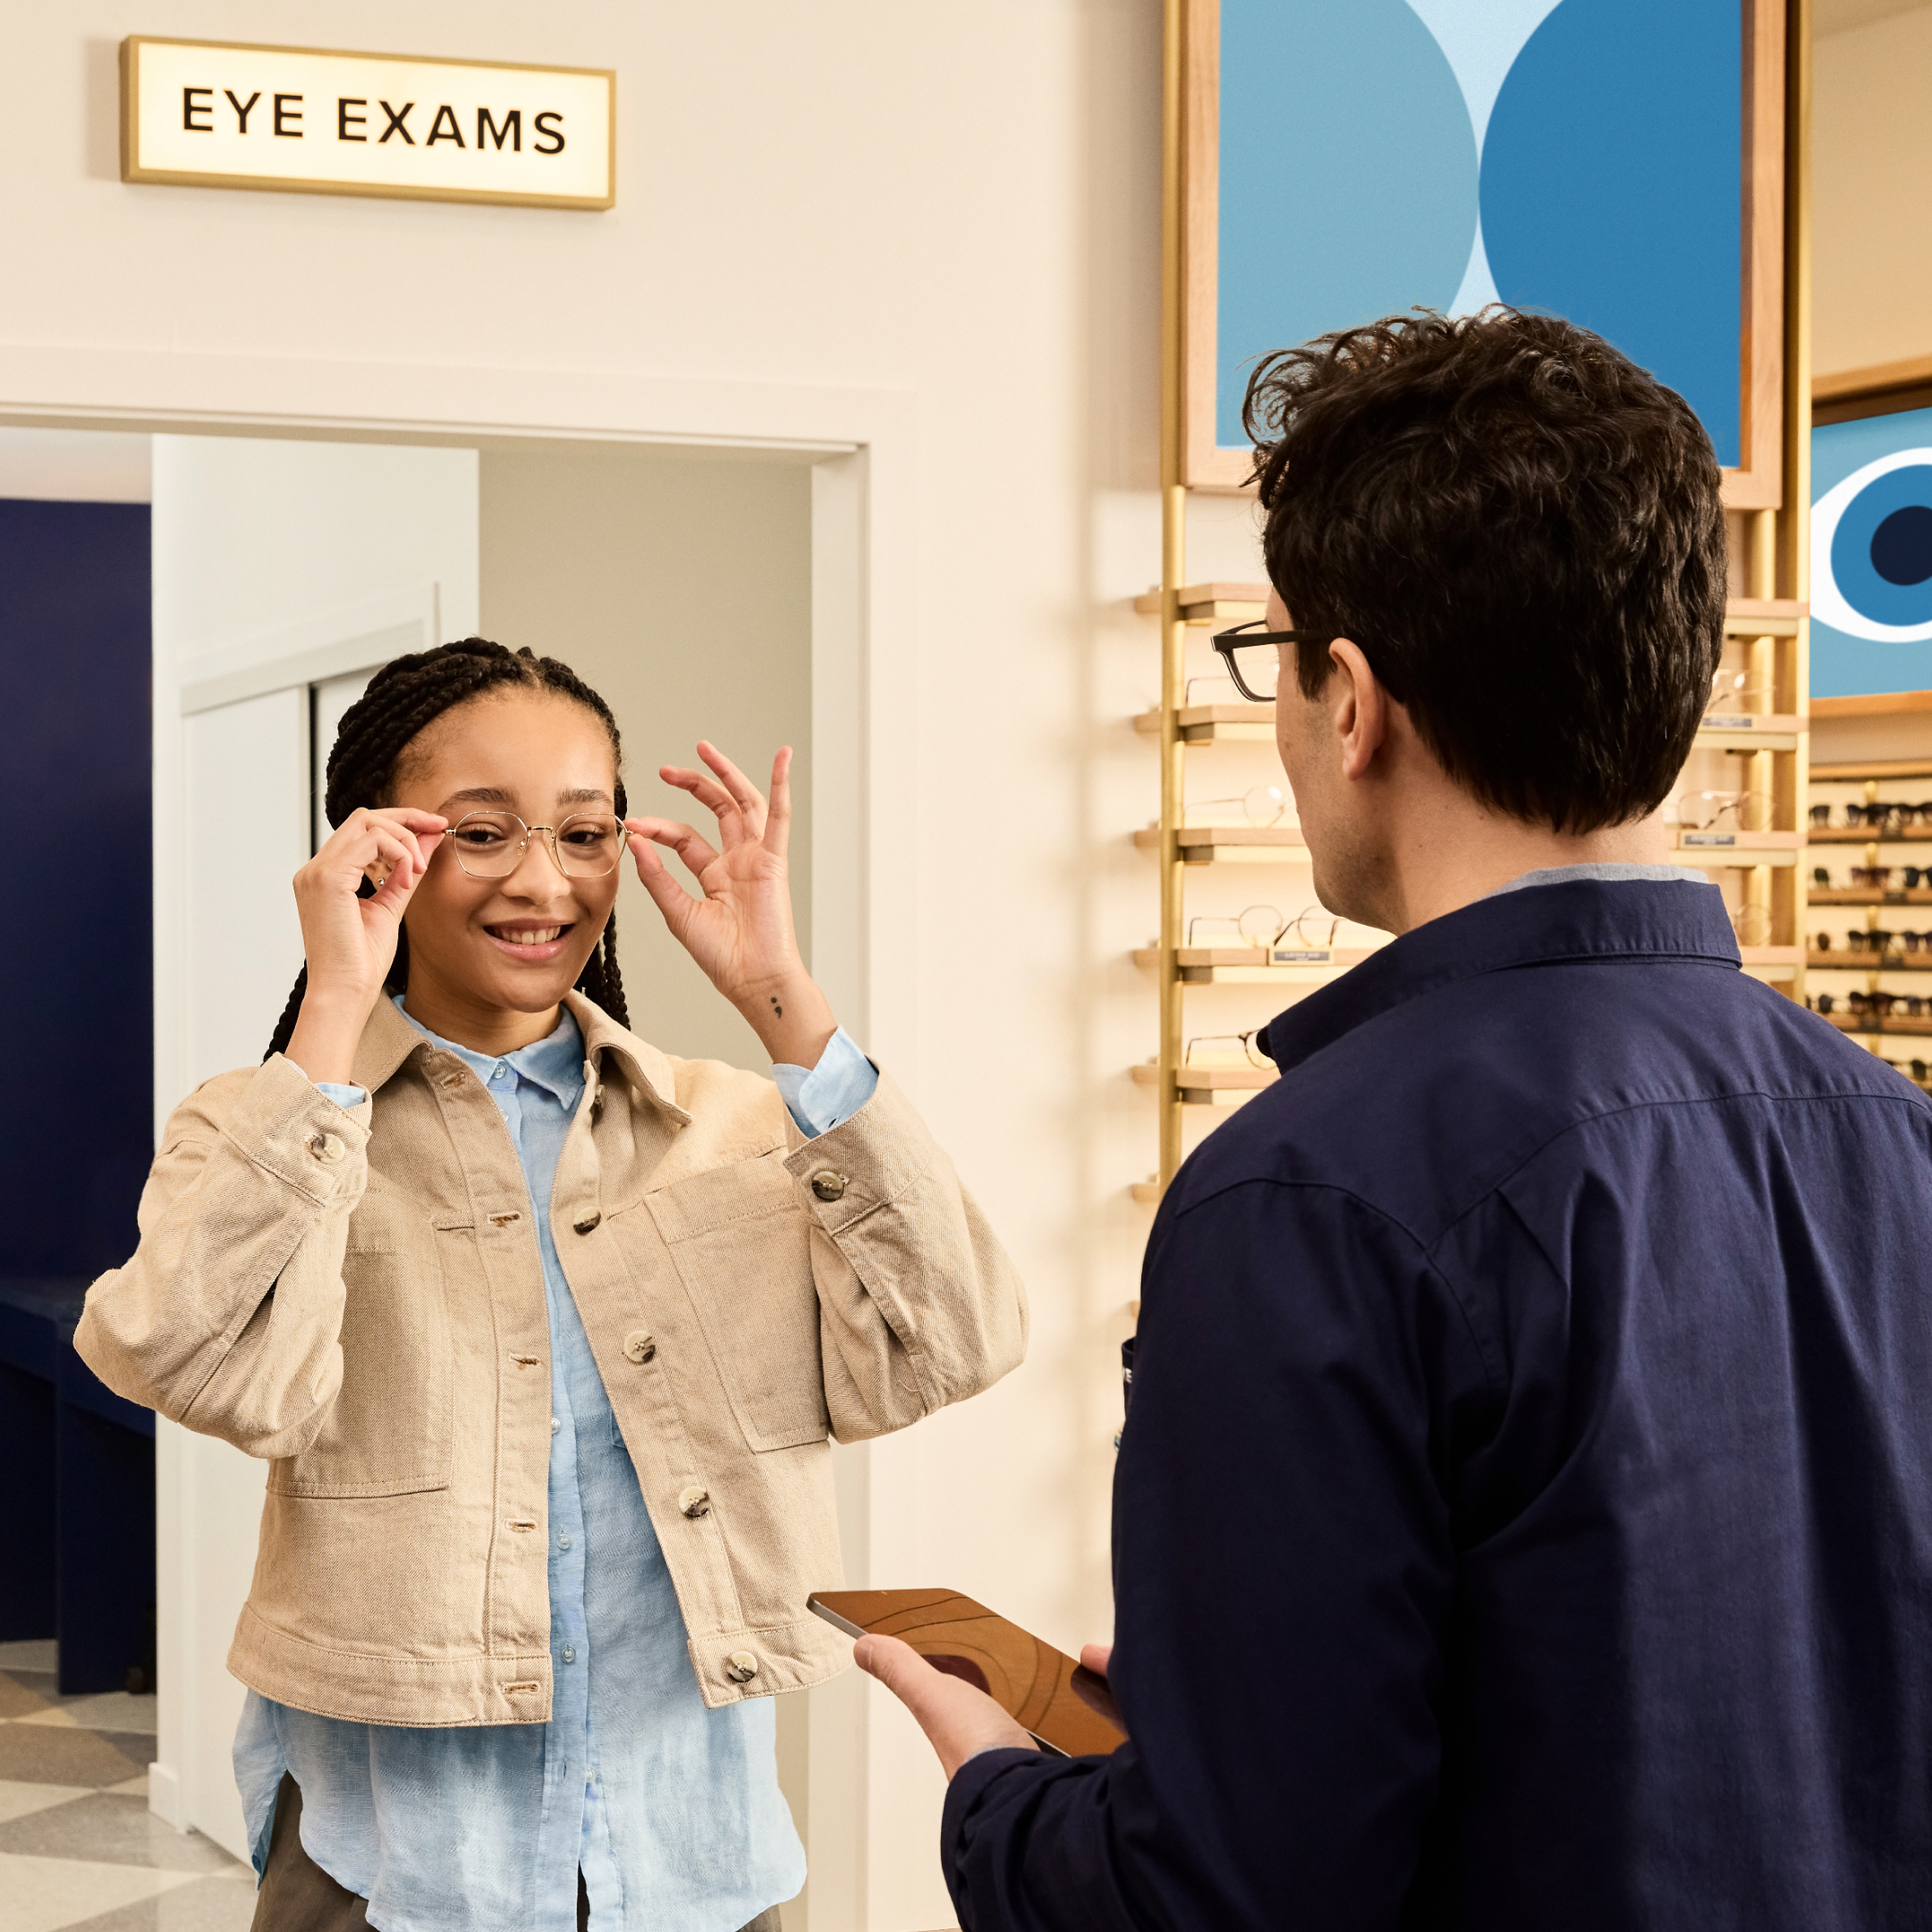 Eye Exams are Available from Warby Parker